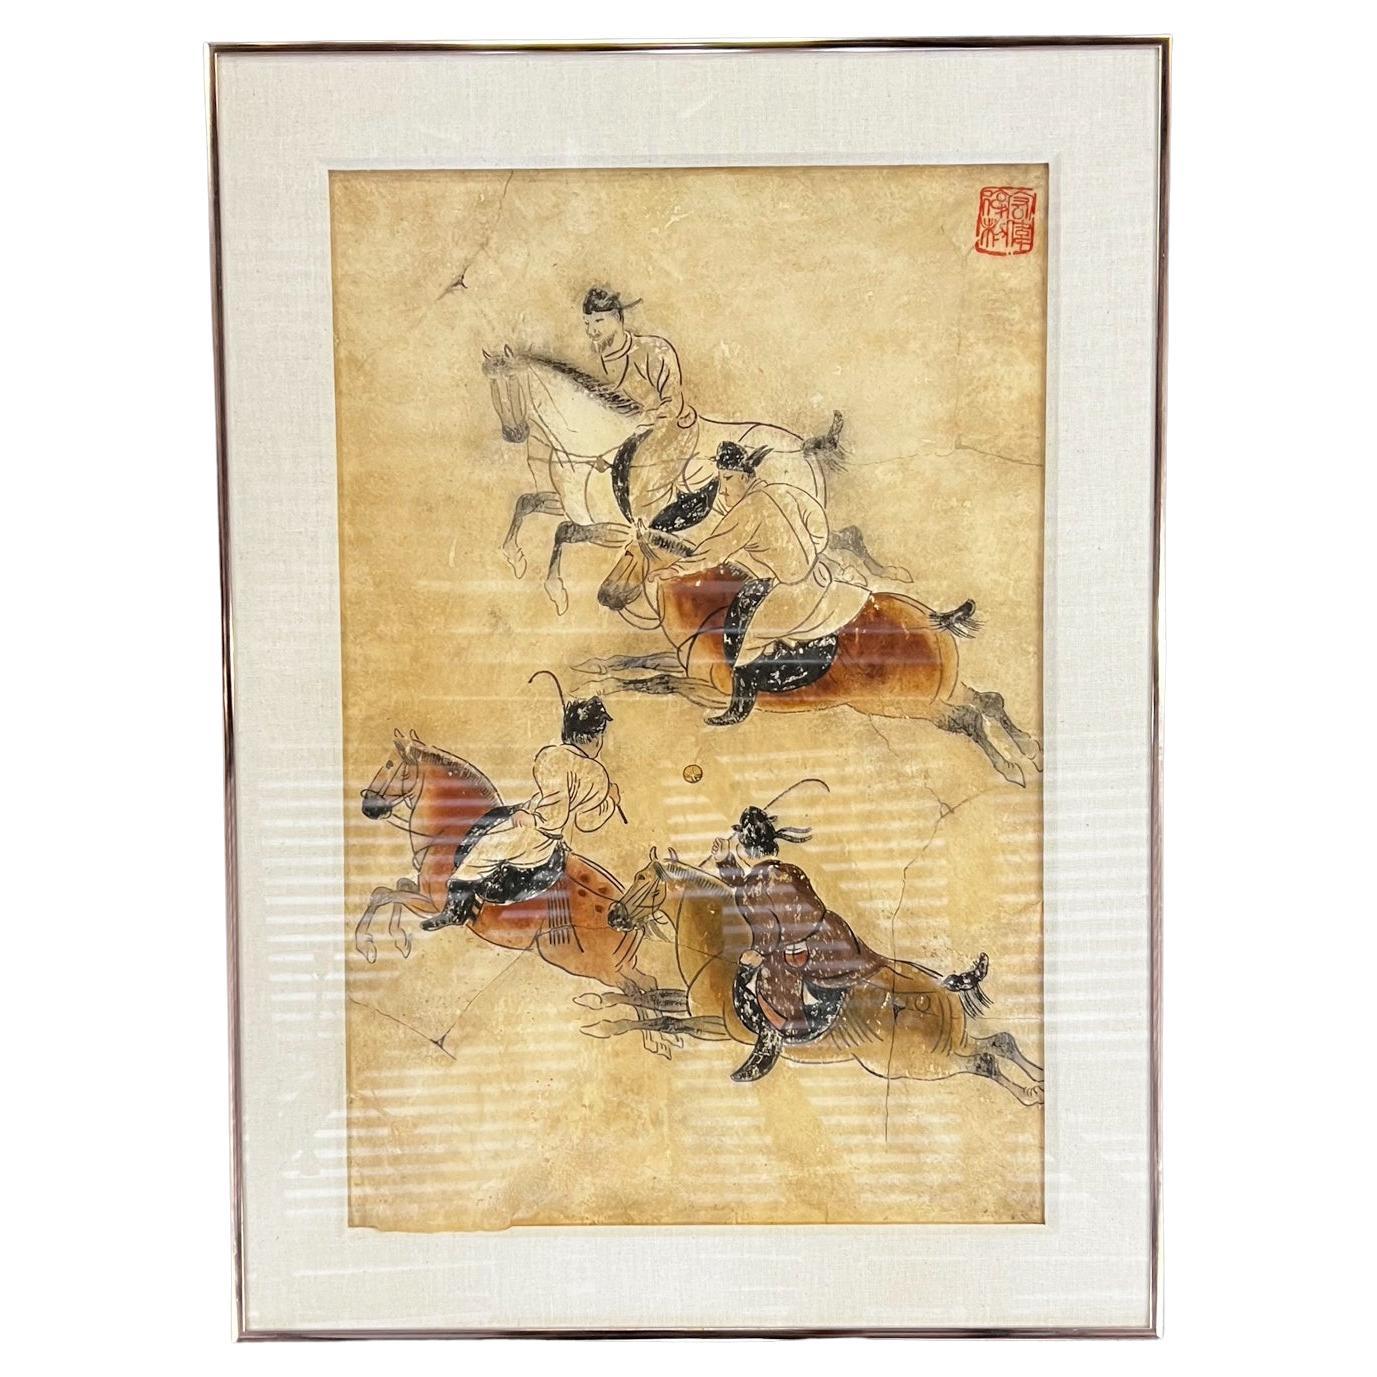 Tang Dynasty Polo Players Chinese Figurative Ink Wash Painting Handmade Paper